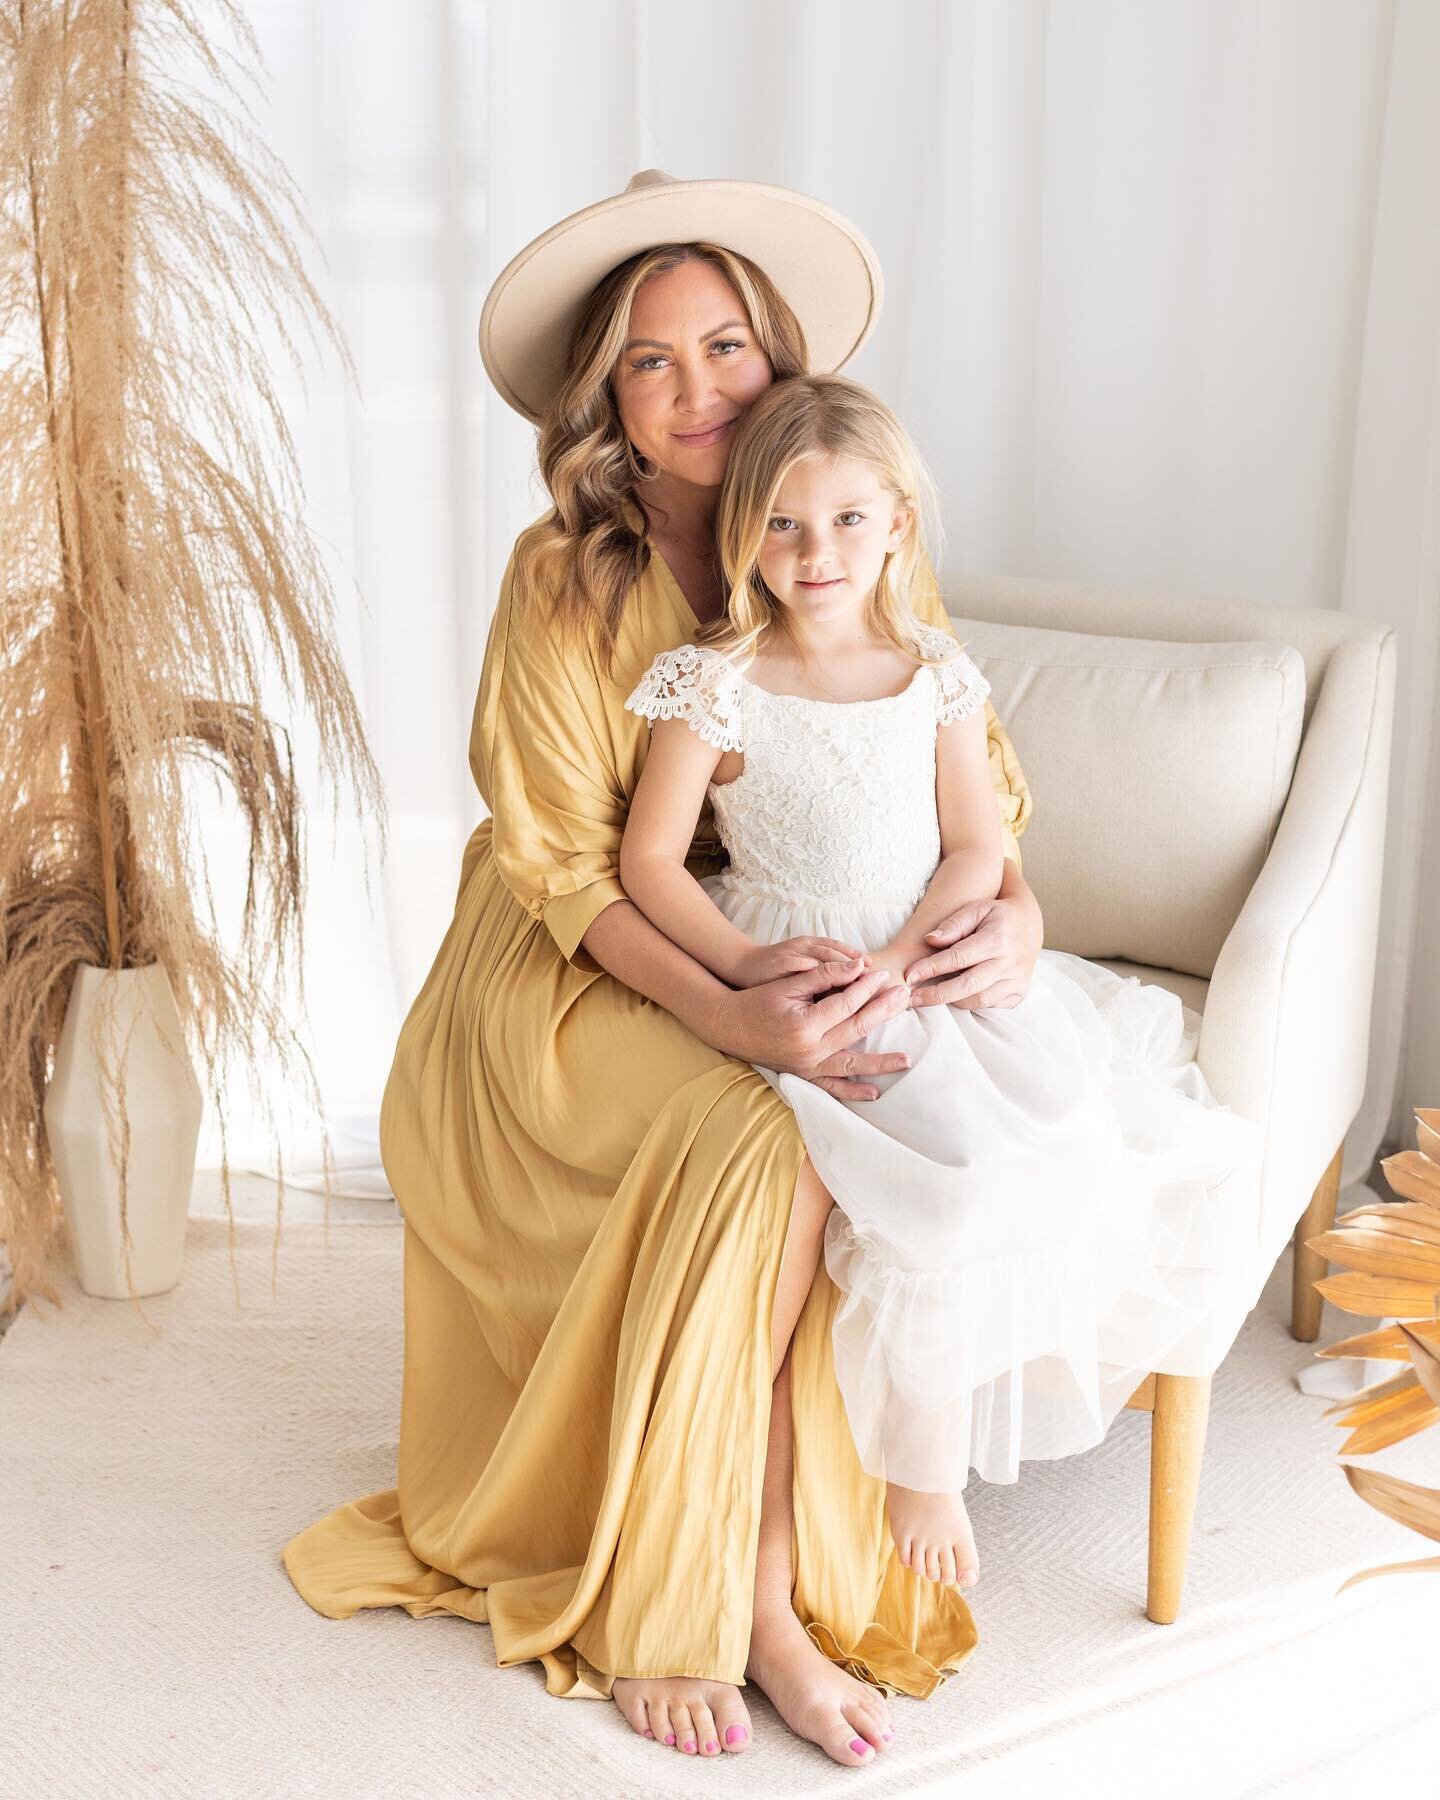 This impossibly dreamy in-studio Mama session by Janet Wheeland 😍🥺

(Although we might be a little biased over how much we love this session... Because it's our founder @camrynclairphoto and her daughter, Sunny!)

We LOVED how perfectly Camryn's go